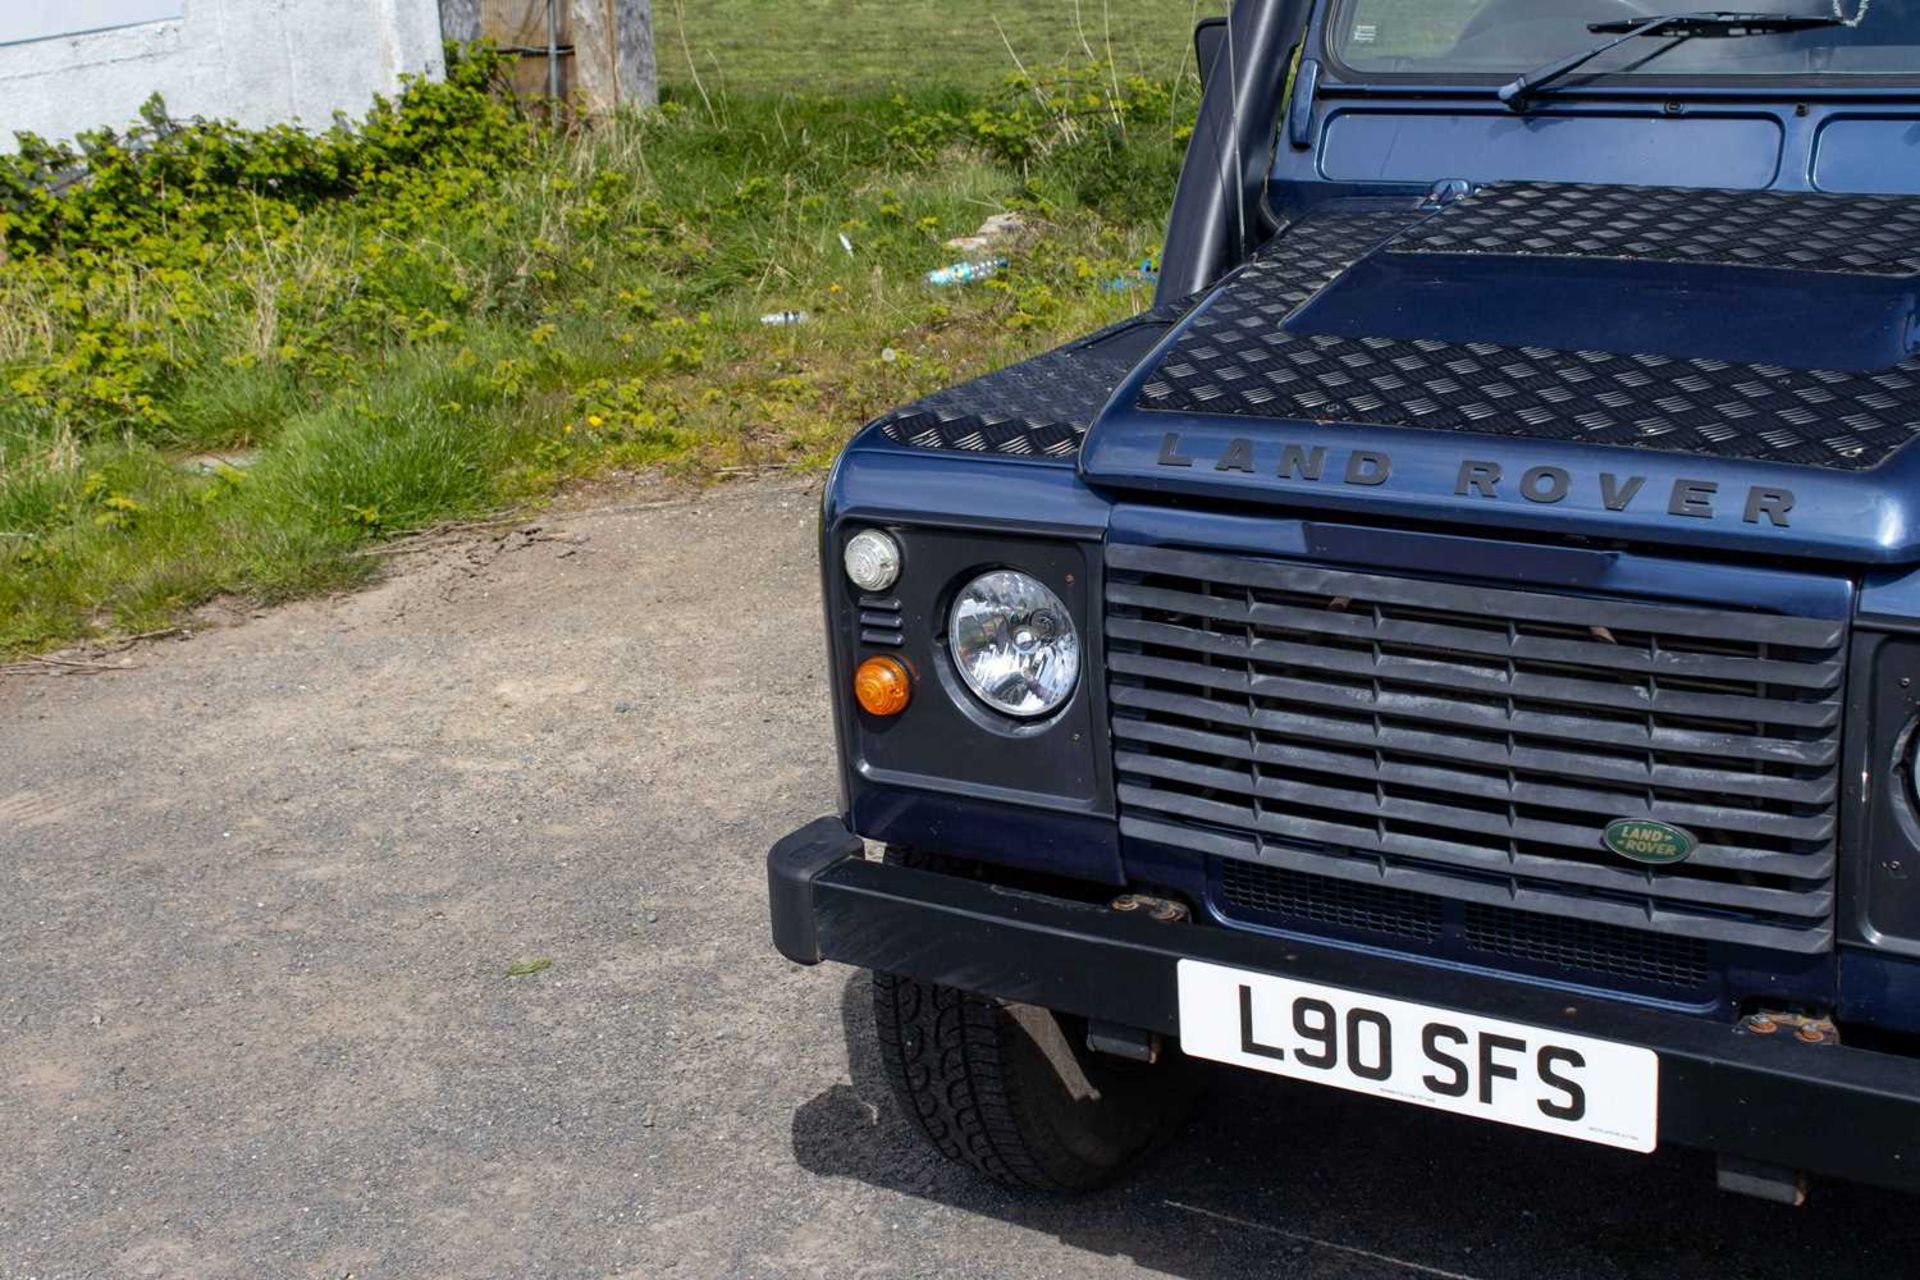 2007 Land Rover Defender 90 County  Powered by the 2.4-litre TDCi unit and features numerous tastefu - Image 19 of 76